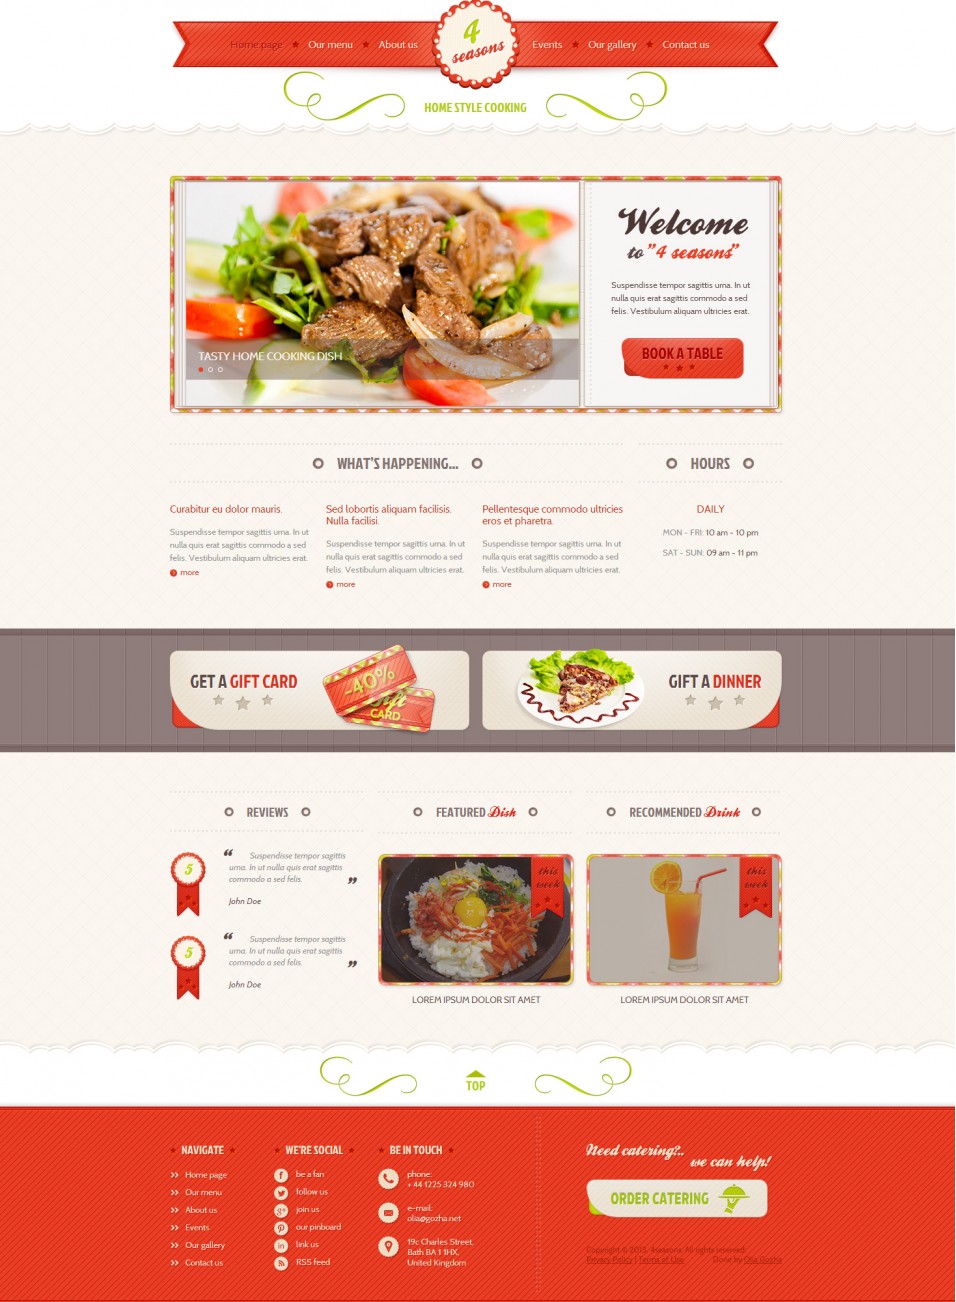 http://www.template.net/wp-content/themes/template/image-regenerate.php?&w=956&zc=2& data-cke-saved-src=http://www.template.net/wp-content/uploads/2014/07/4-Seasons-Restaurant-Cafe-HTML5-CSS3-Template.jpg src=http://www.template.net/wp-content/uploads/2014/07/4-Seasons-Restaurant-Cafe-HTML5-CSS3-Template.jpg